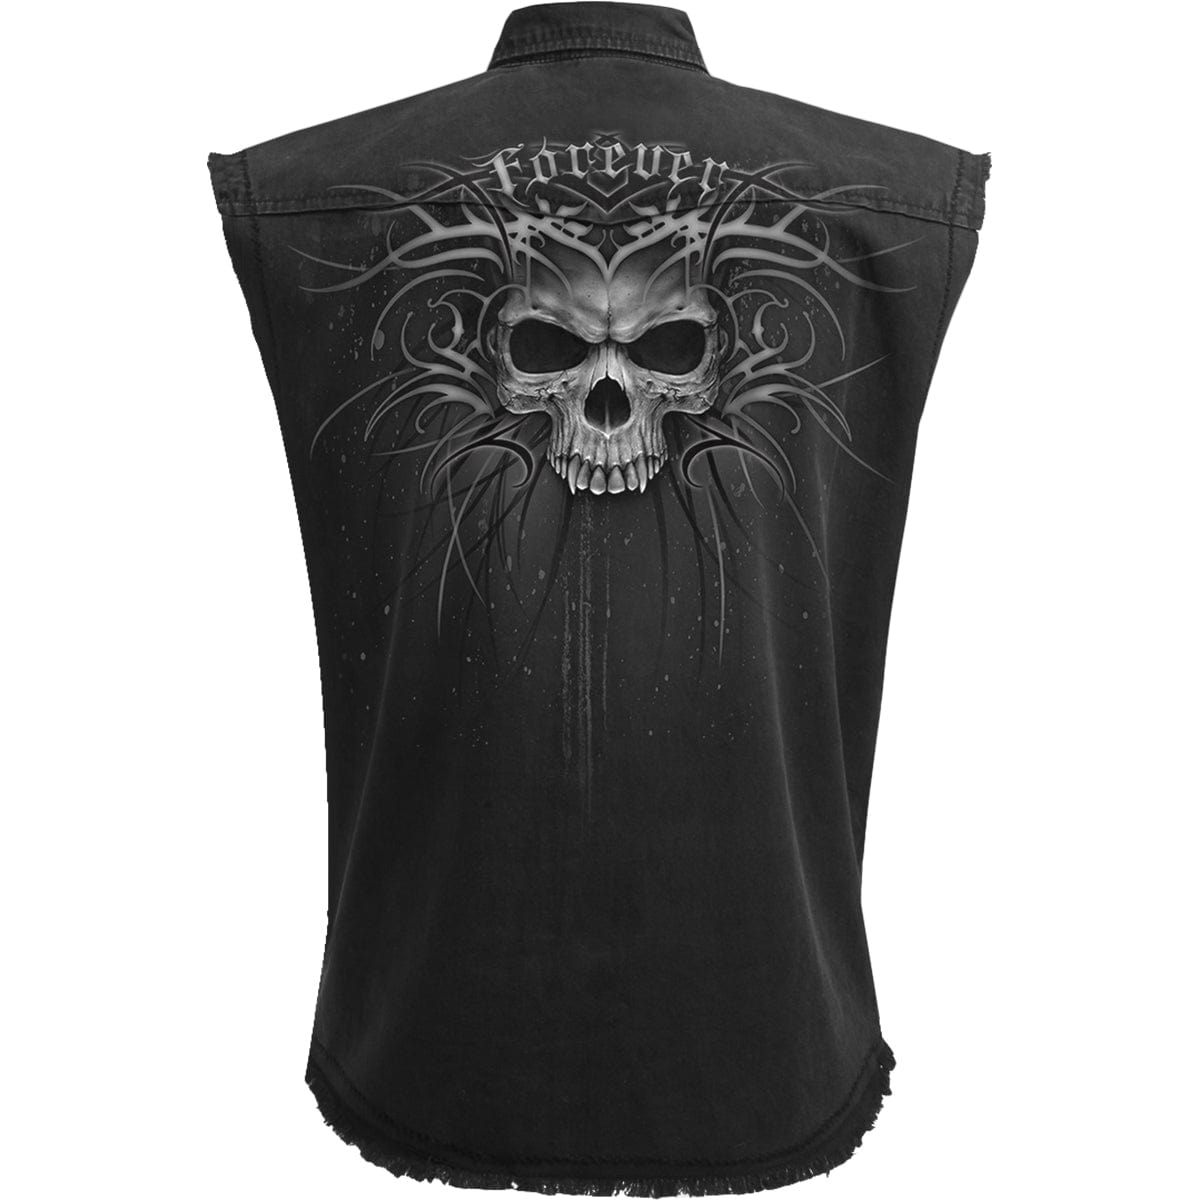 DEATH FOREVER - Sleeveless Stone Washed Worker Black - Spiral USA